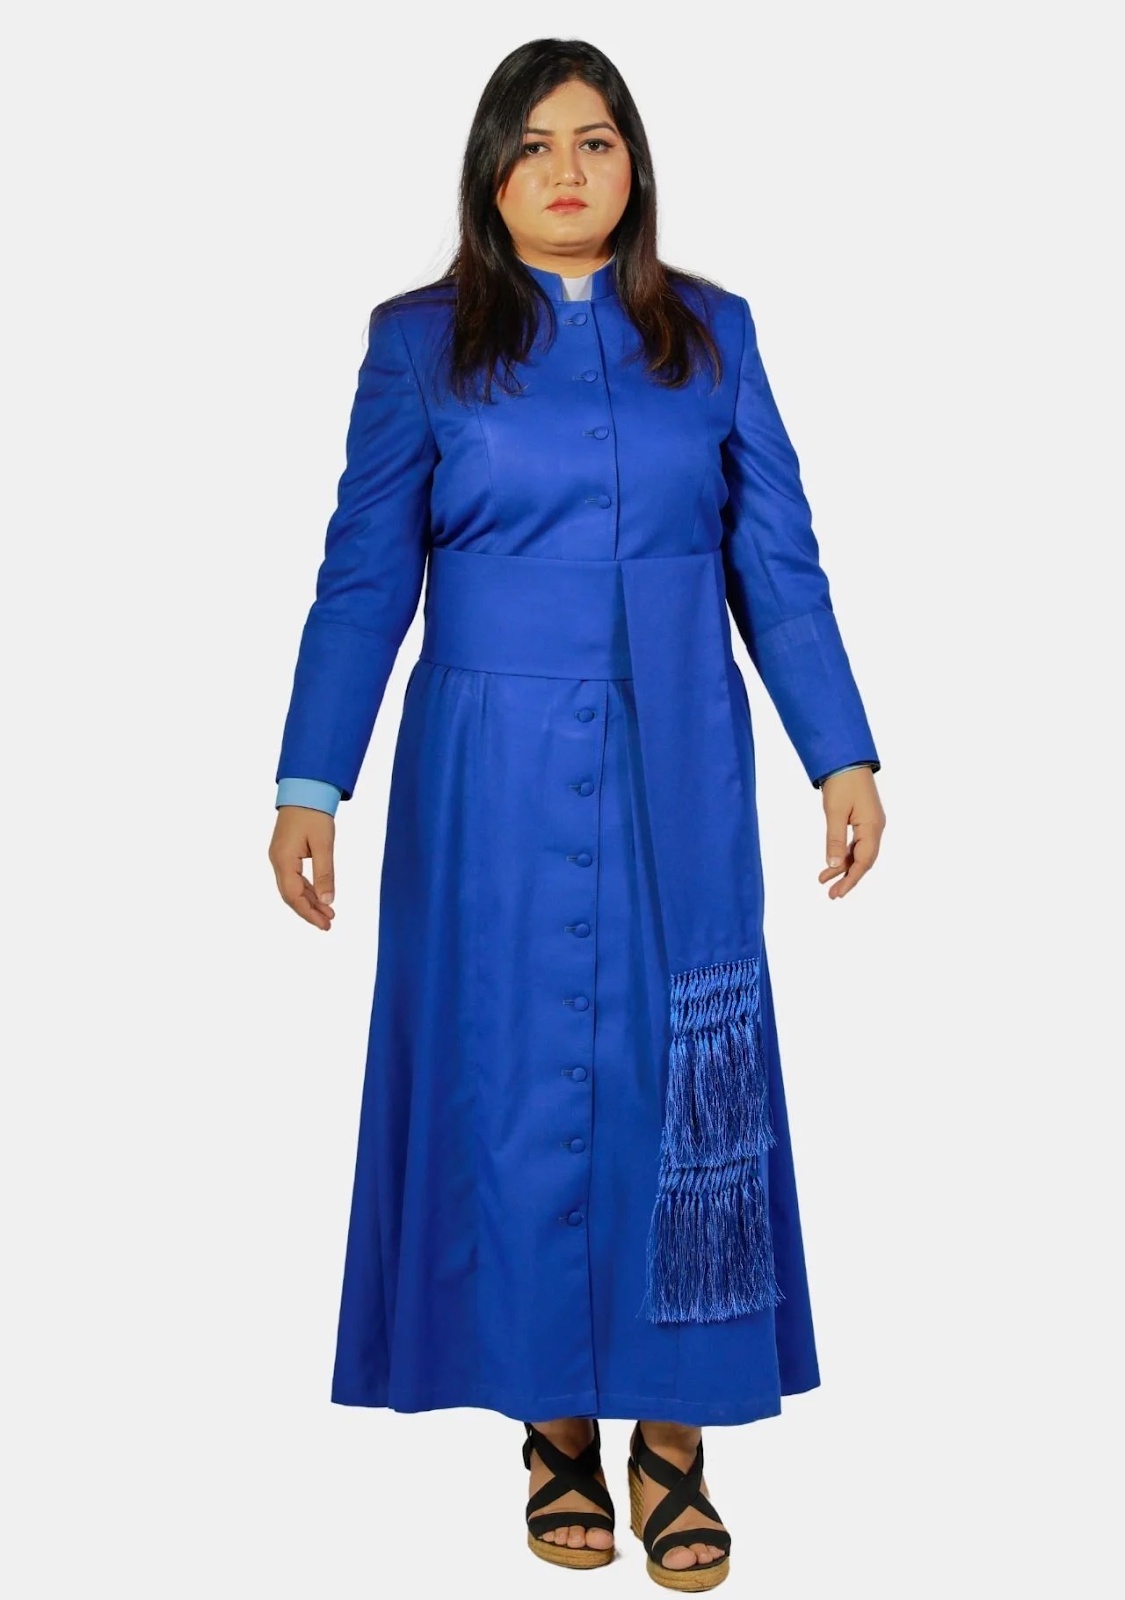 Blue Clergy Robes - Enhance Your Presence with Dignity